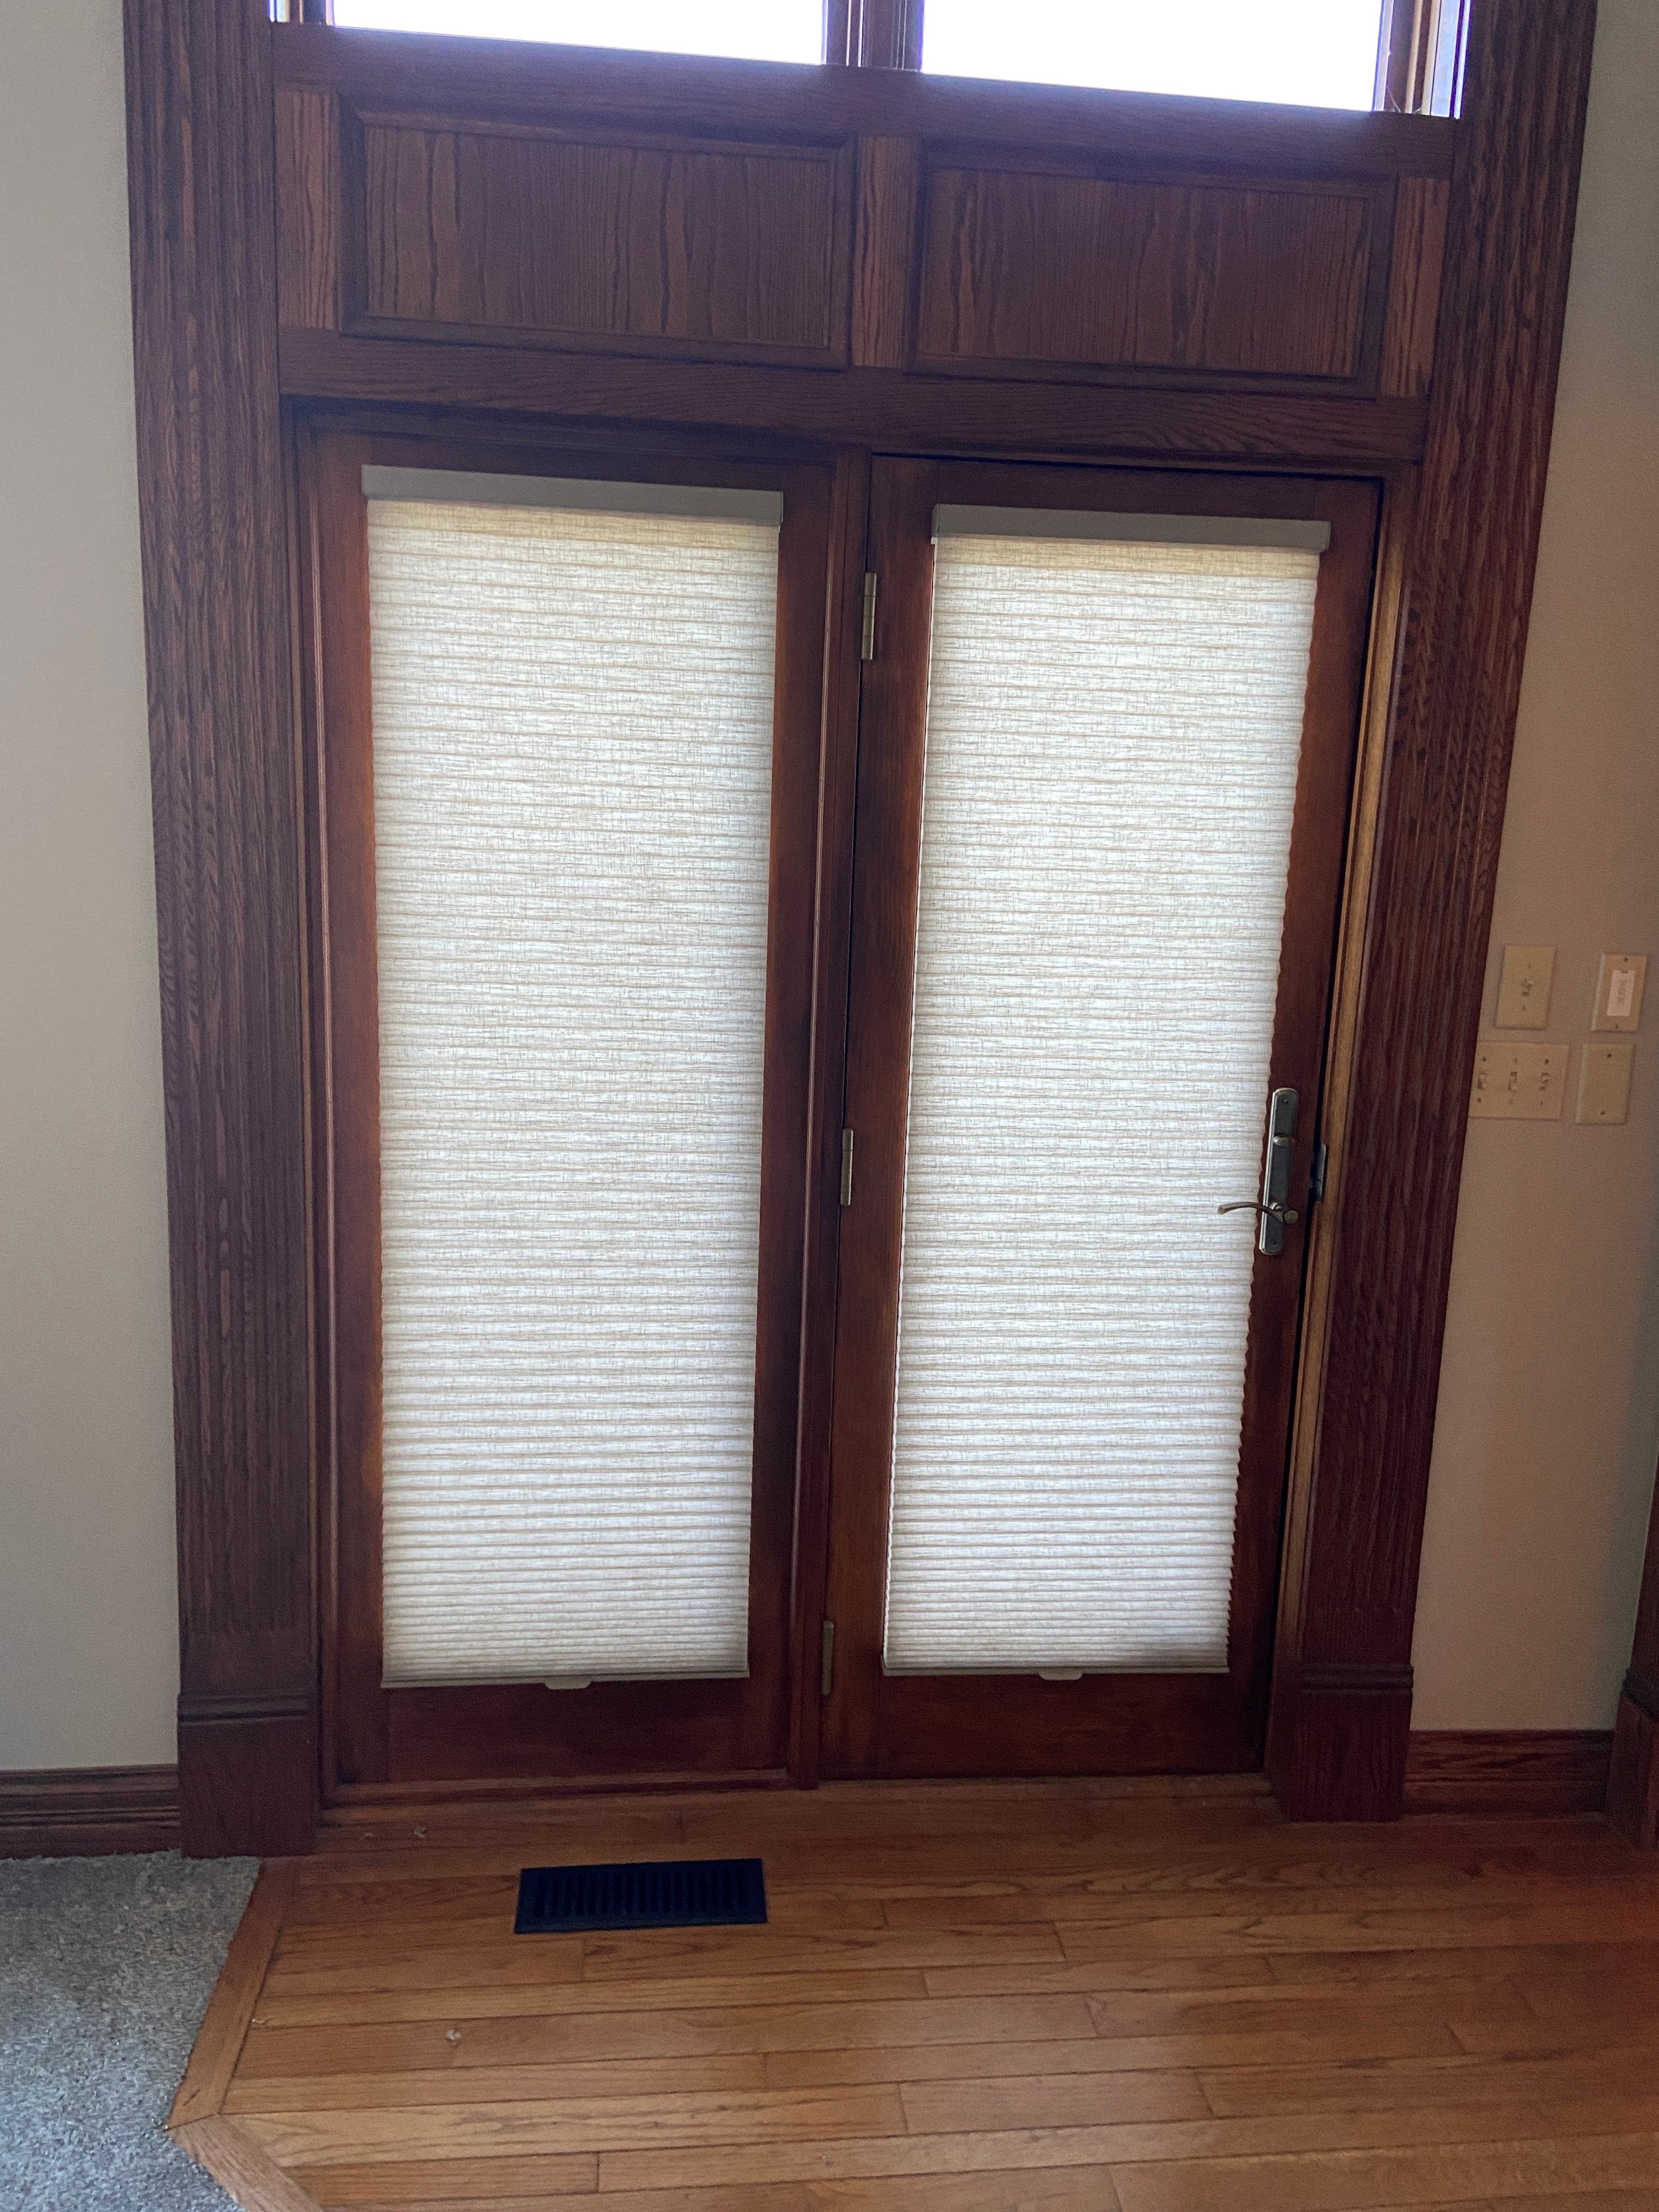  Hunter Douglas Duette® Honeycomb Shades in Alustra Leela Escape fabric make a great option for French Doors 